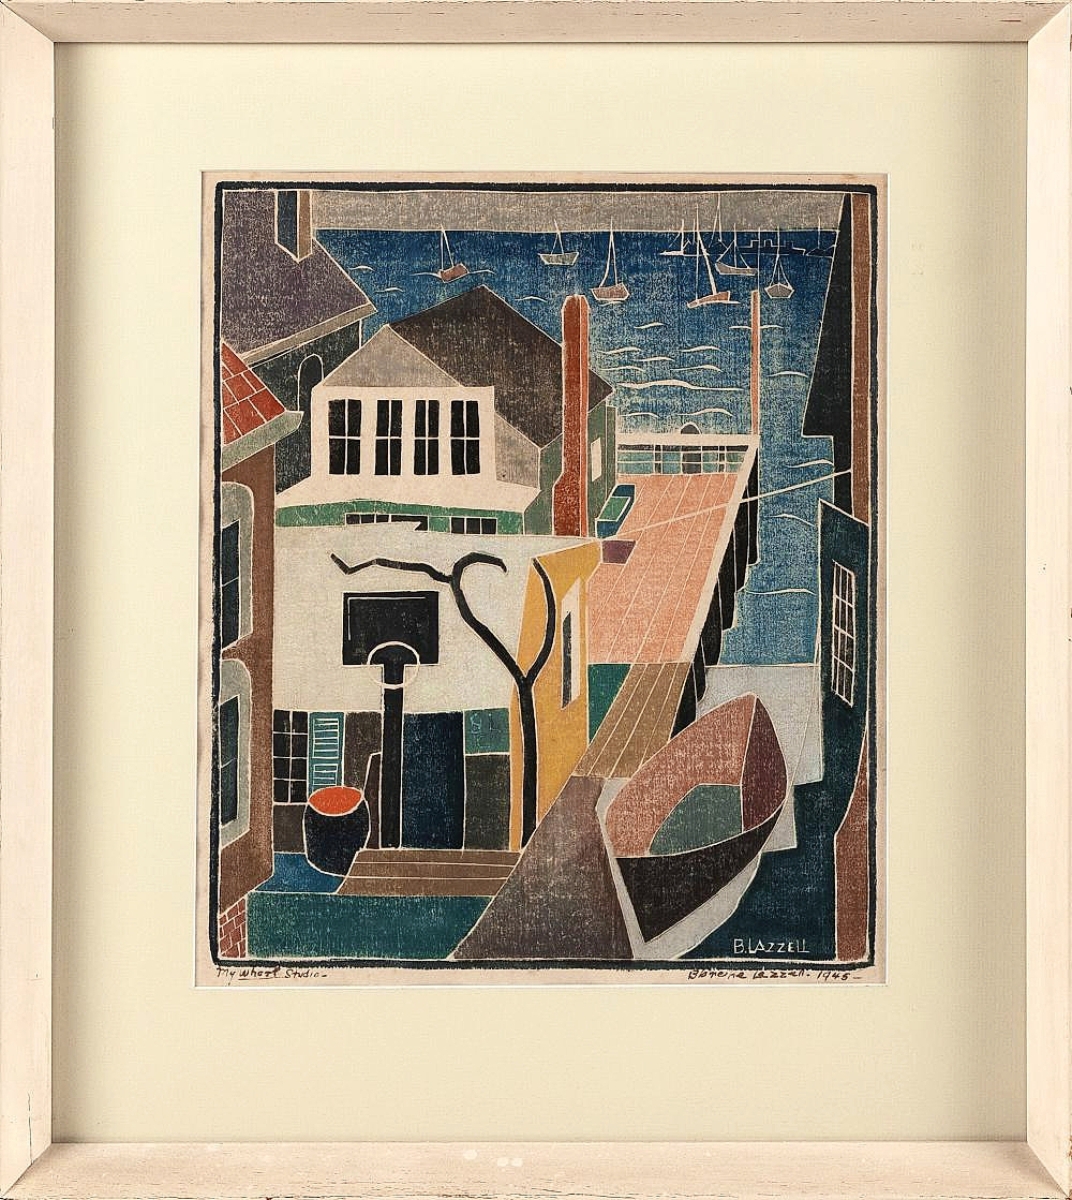 “My Wharf Studio” by Blanche Lazzell (American, 1878-1856), 1945, whiteline woodblock print, came from a Provincetown, Mass., estate and sold to a buyer from Provincetown for $150,000 ($35/45,000).